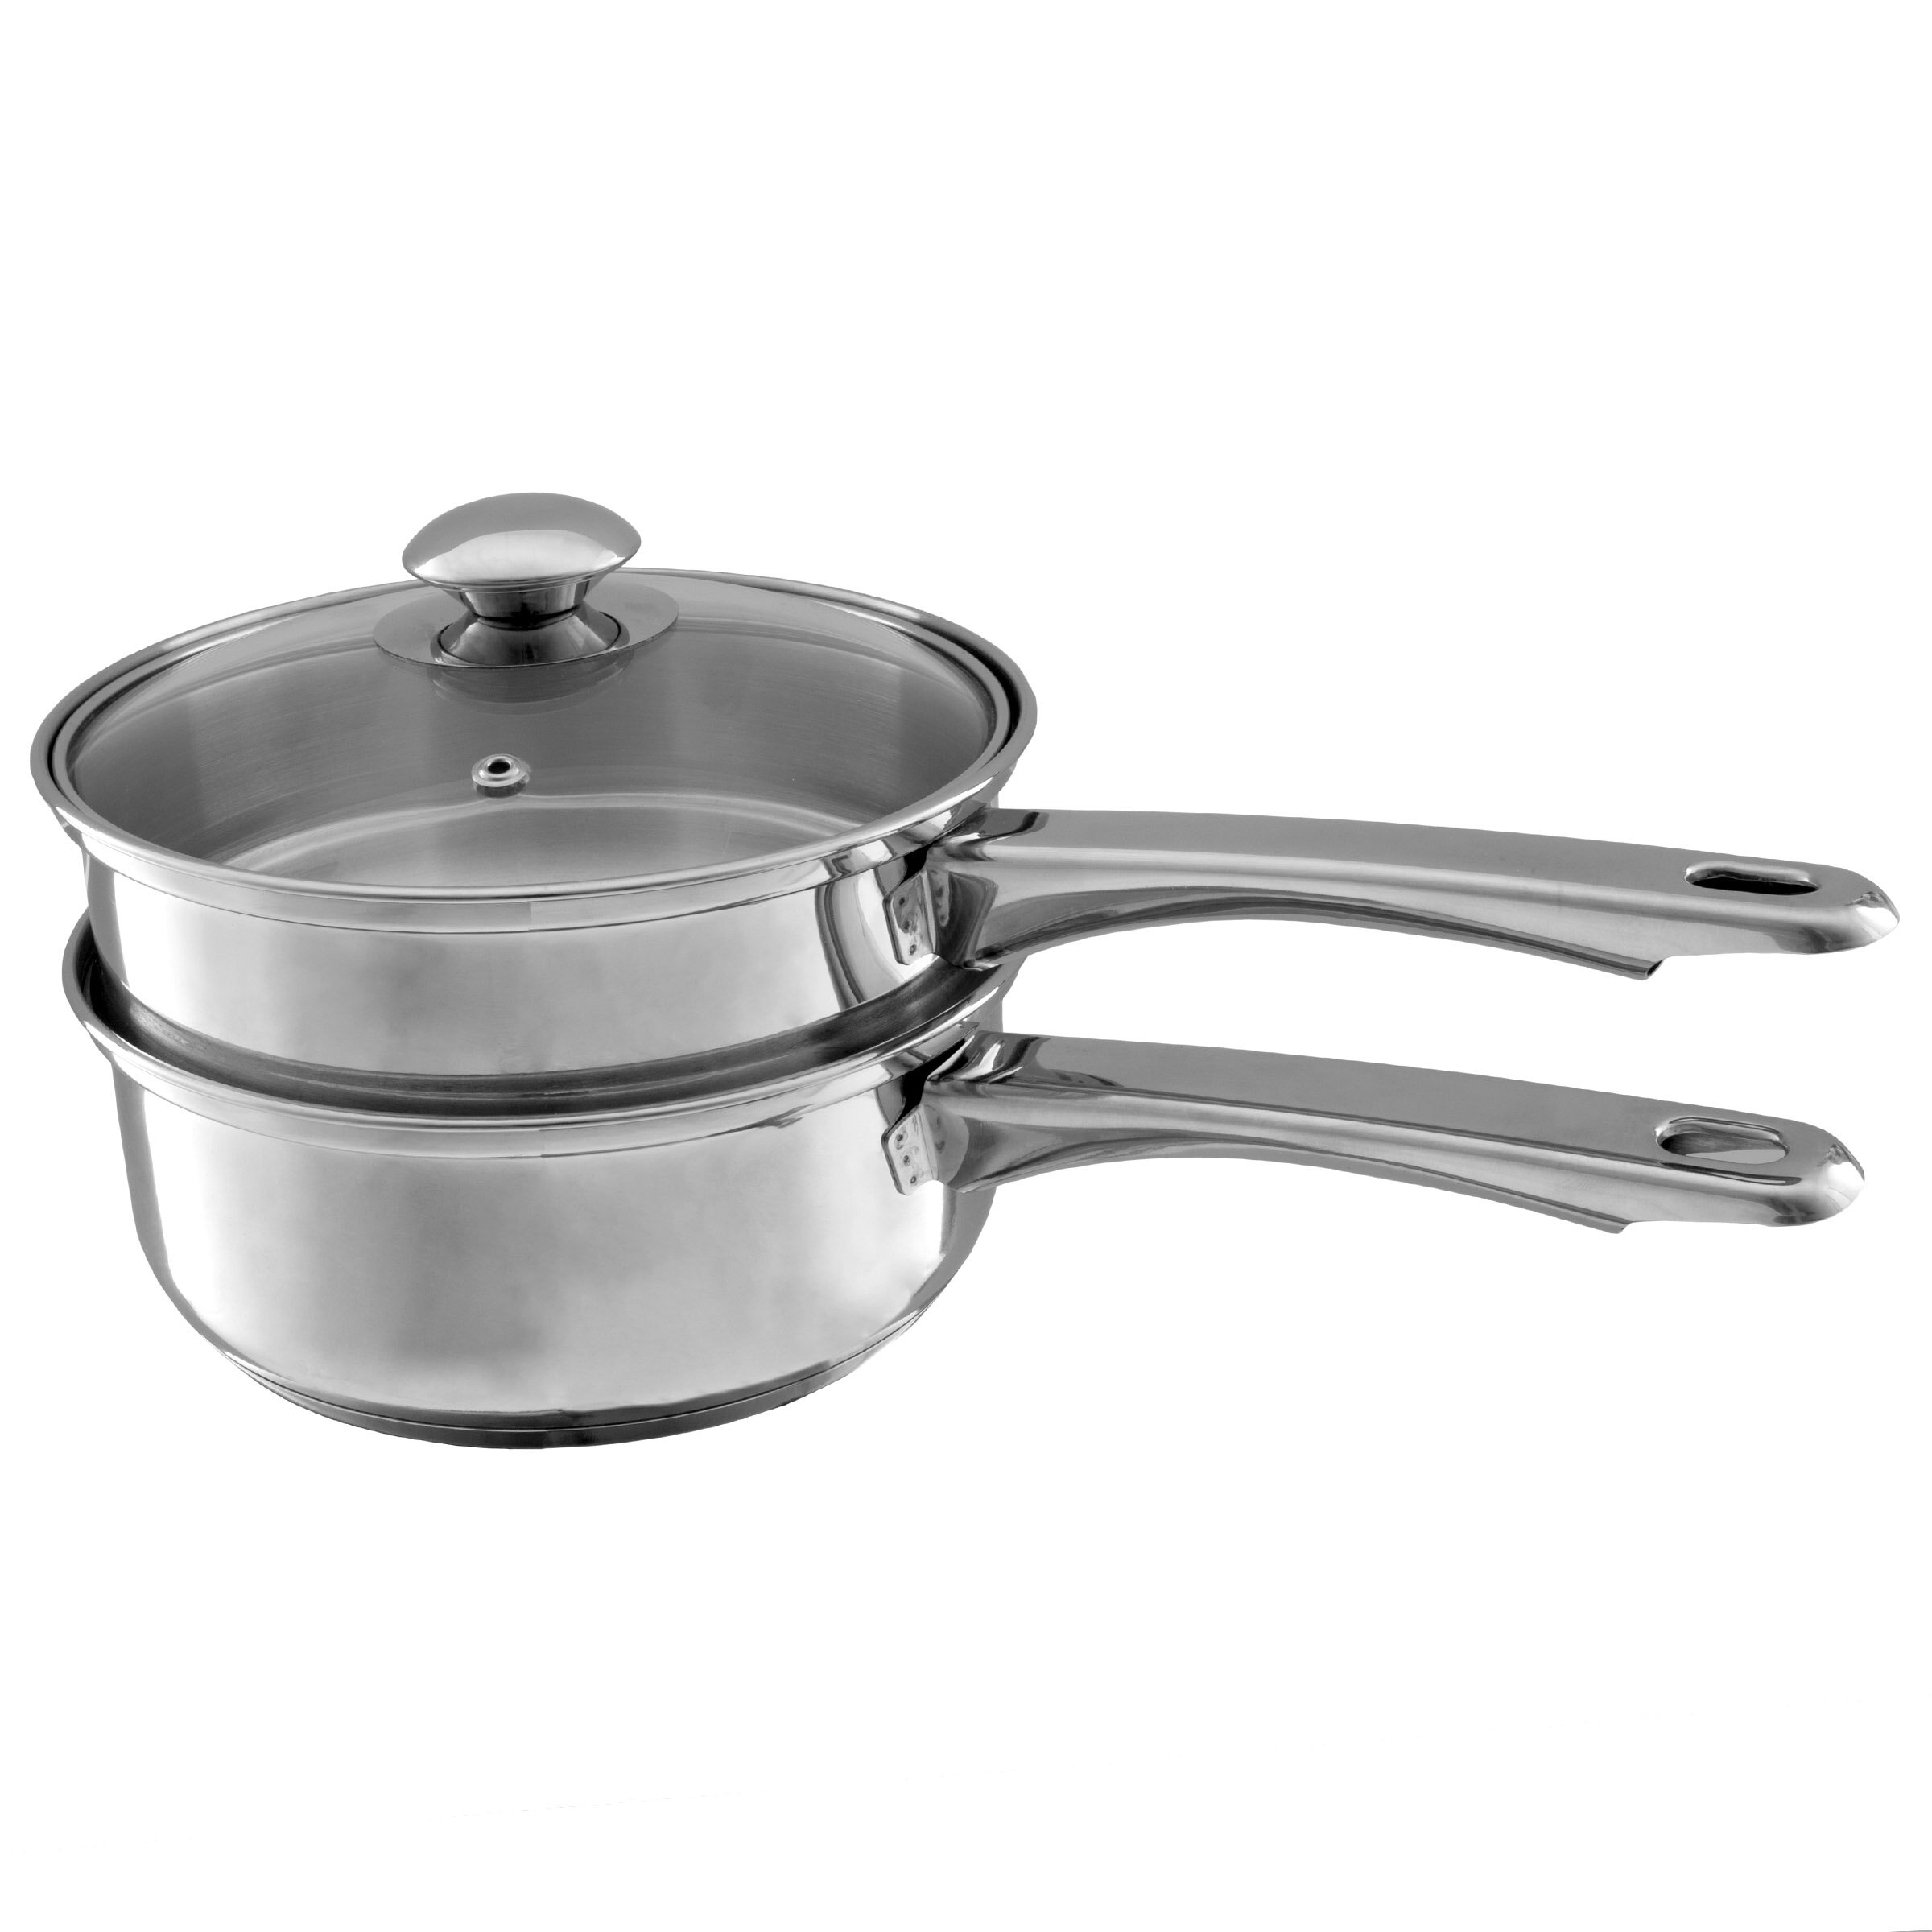 1.5 Quarts Stainless Steel Double Boiler